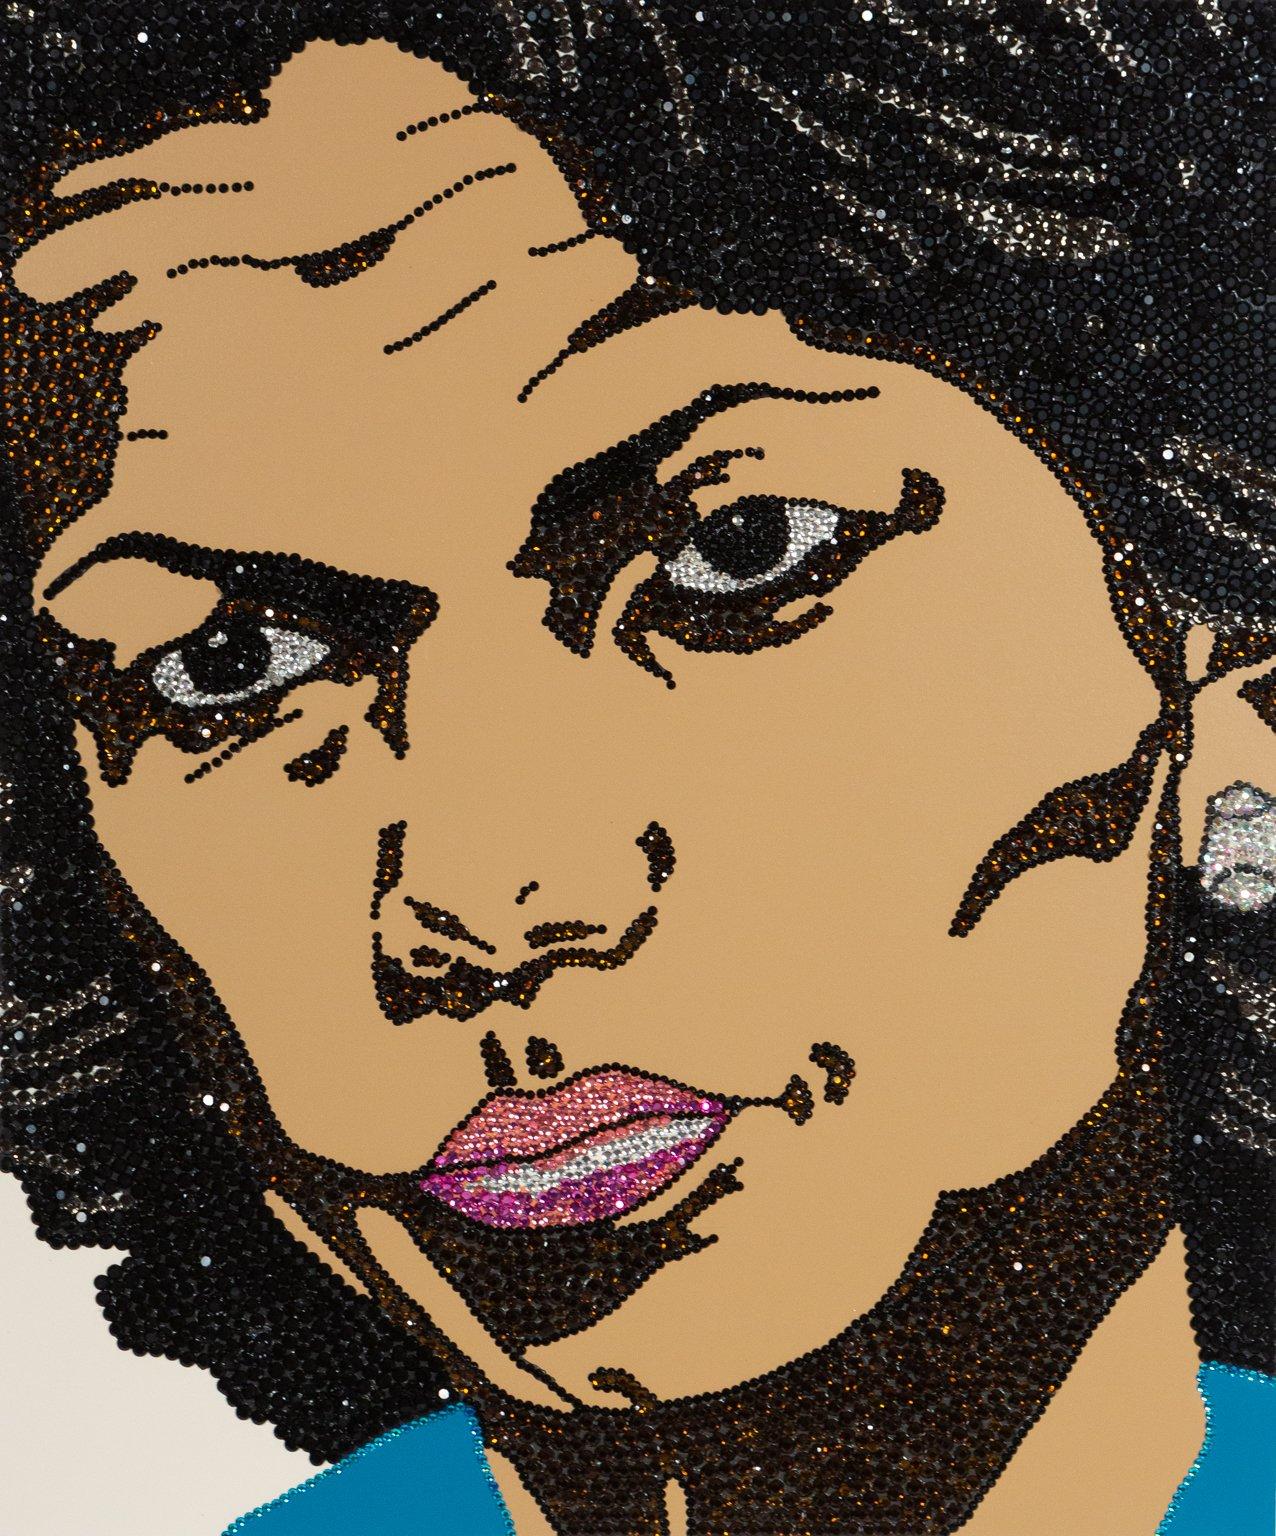 how does mickalene thomas use materials to explore oprah winfrey’s personality and career